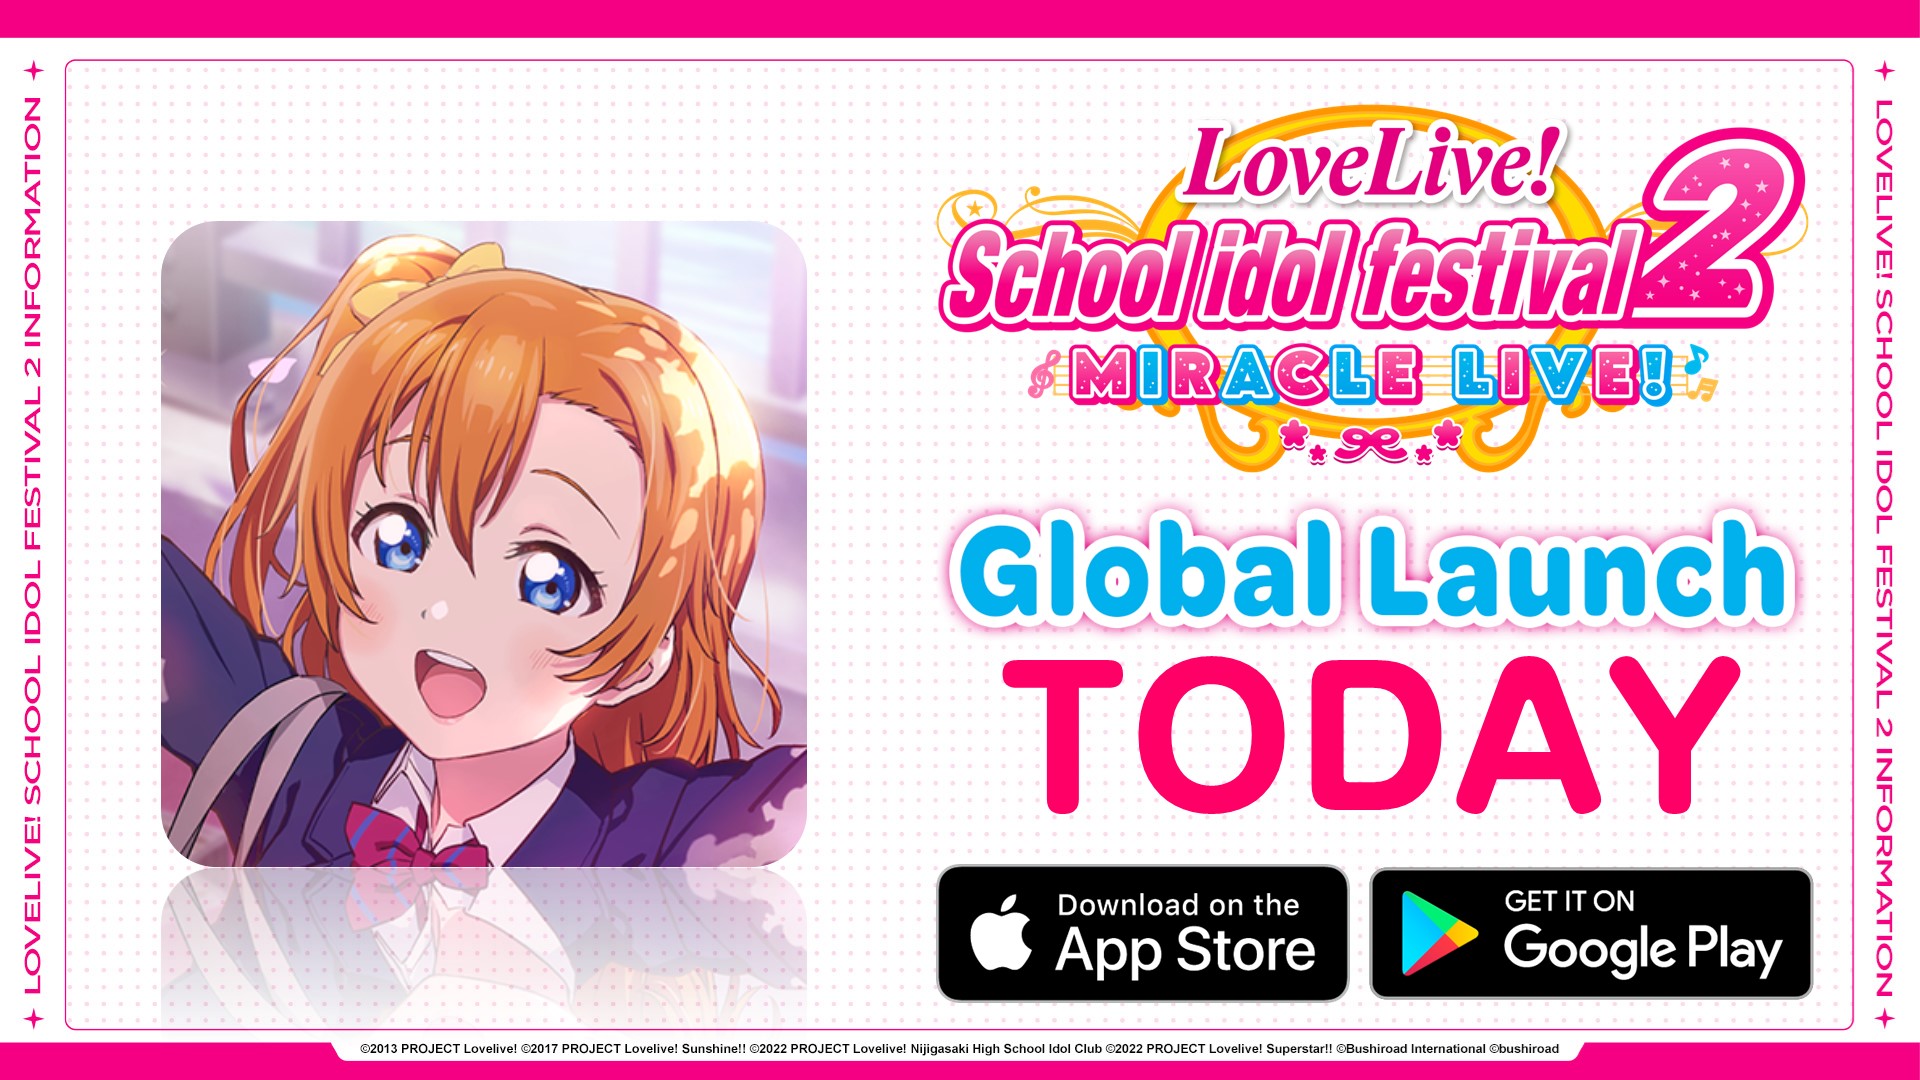 Love Live! School idol festival 2 MIRACLE LIVE! (@lovelive_SIF_GL) / X